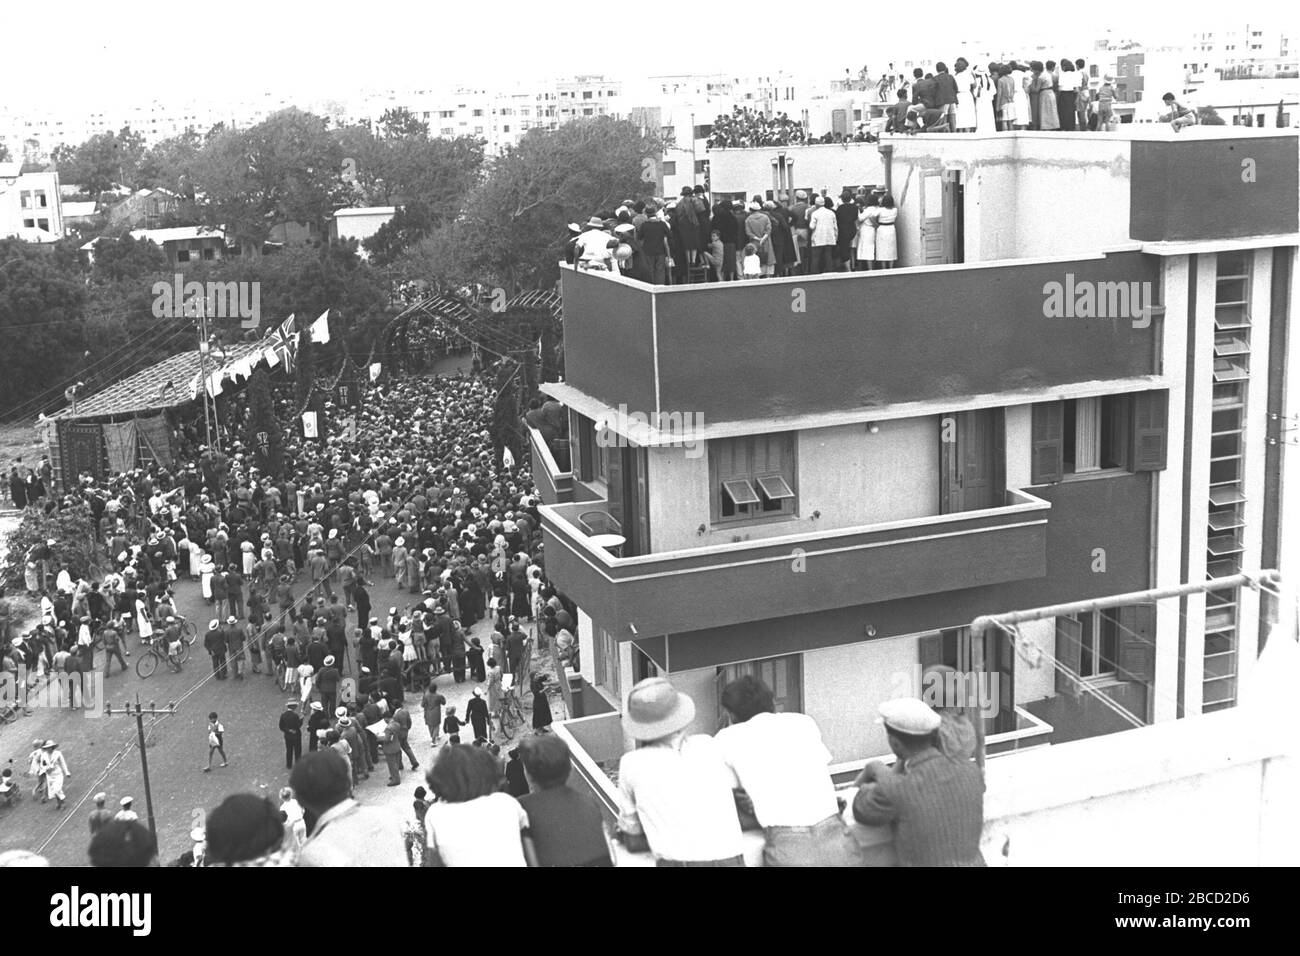 English Citizens Of Tel Aviv Crowding Balconies Rooftops During The Dedication Ceremony Of King George Street In Tel Aviv O Ss O I O O I E Ss O I I I I E U E E O E E O U I U I C E O